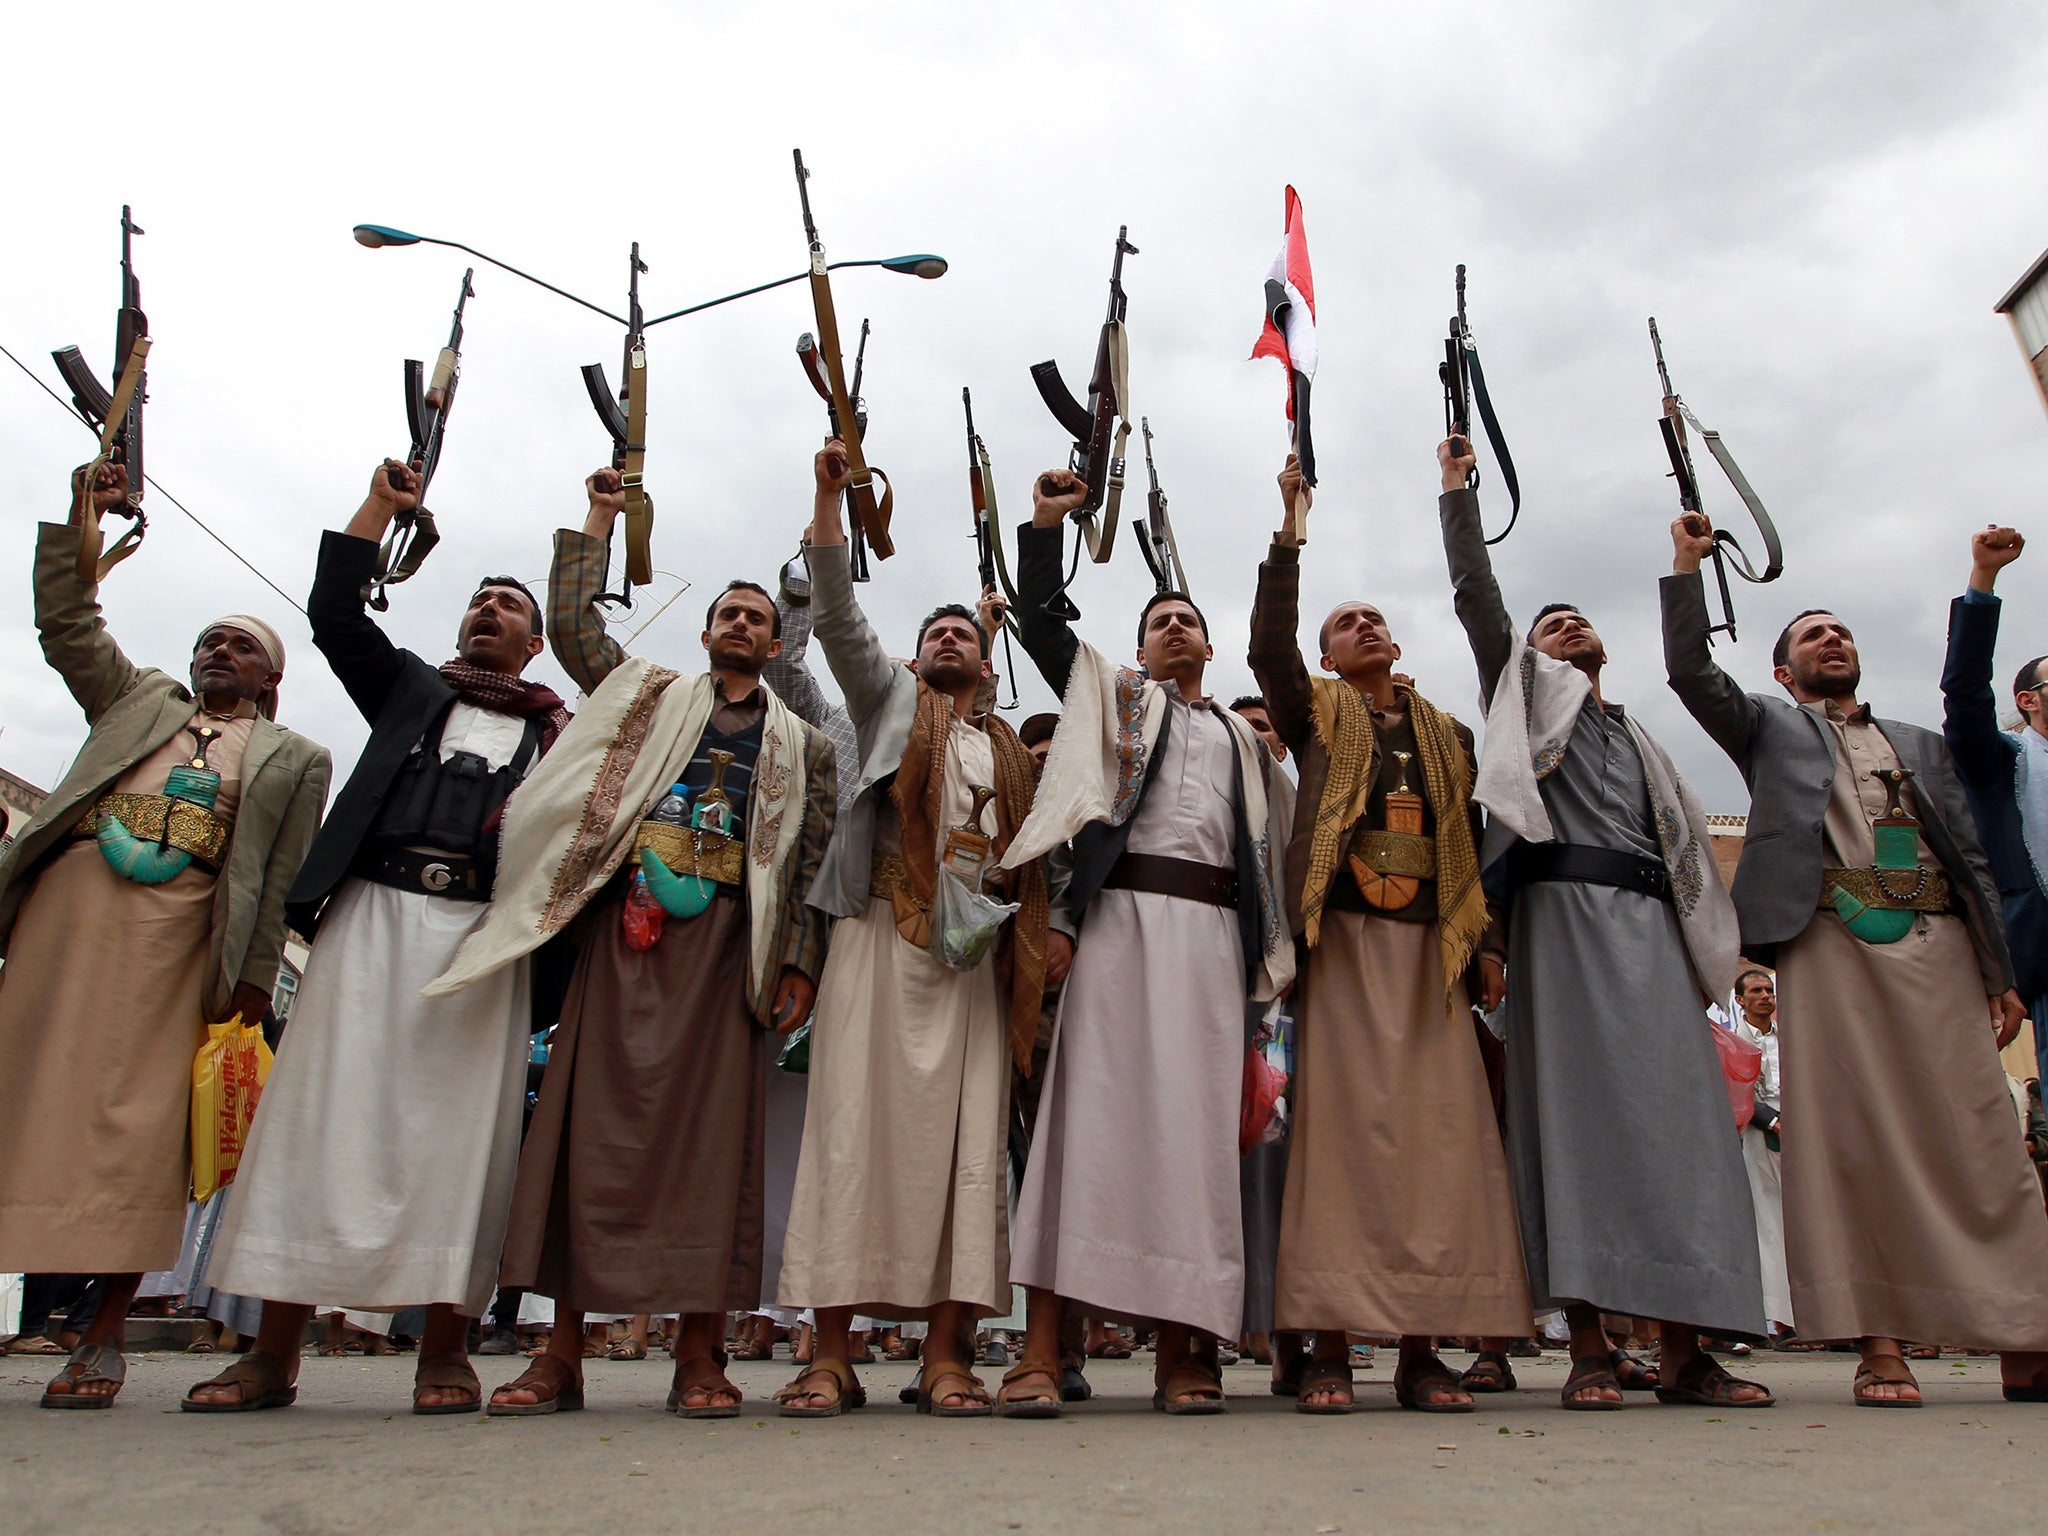 Tribal gunmen in the capital Sanaa show support for the Shia Houthi militia and their opposition to the Saudi-led intervention in Yemen